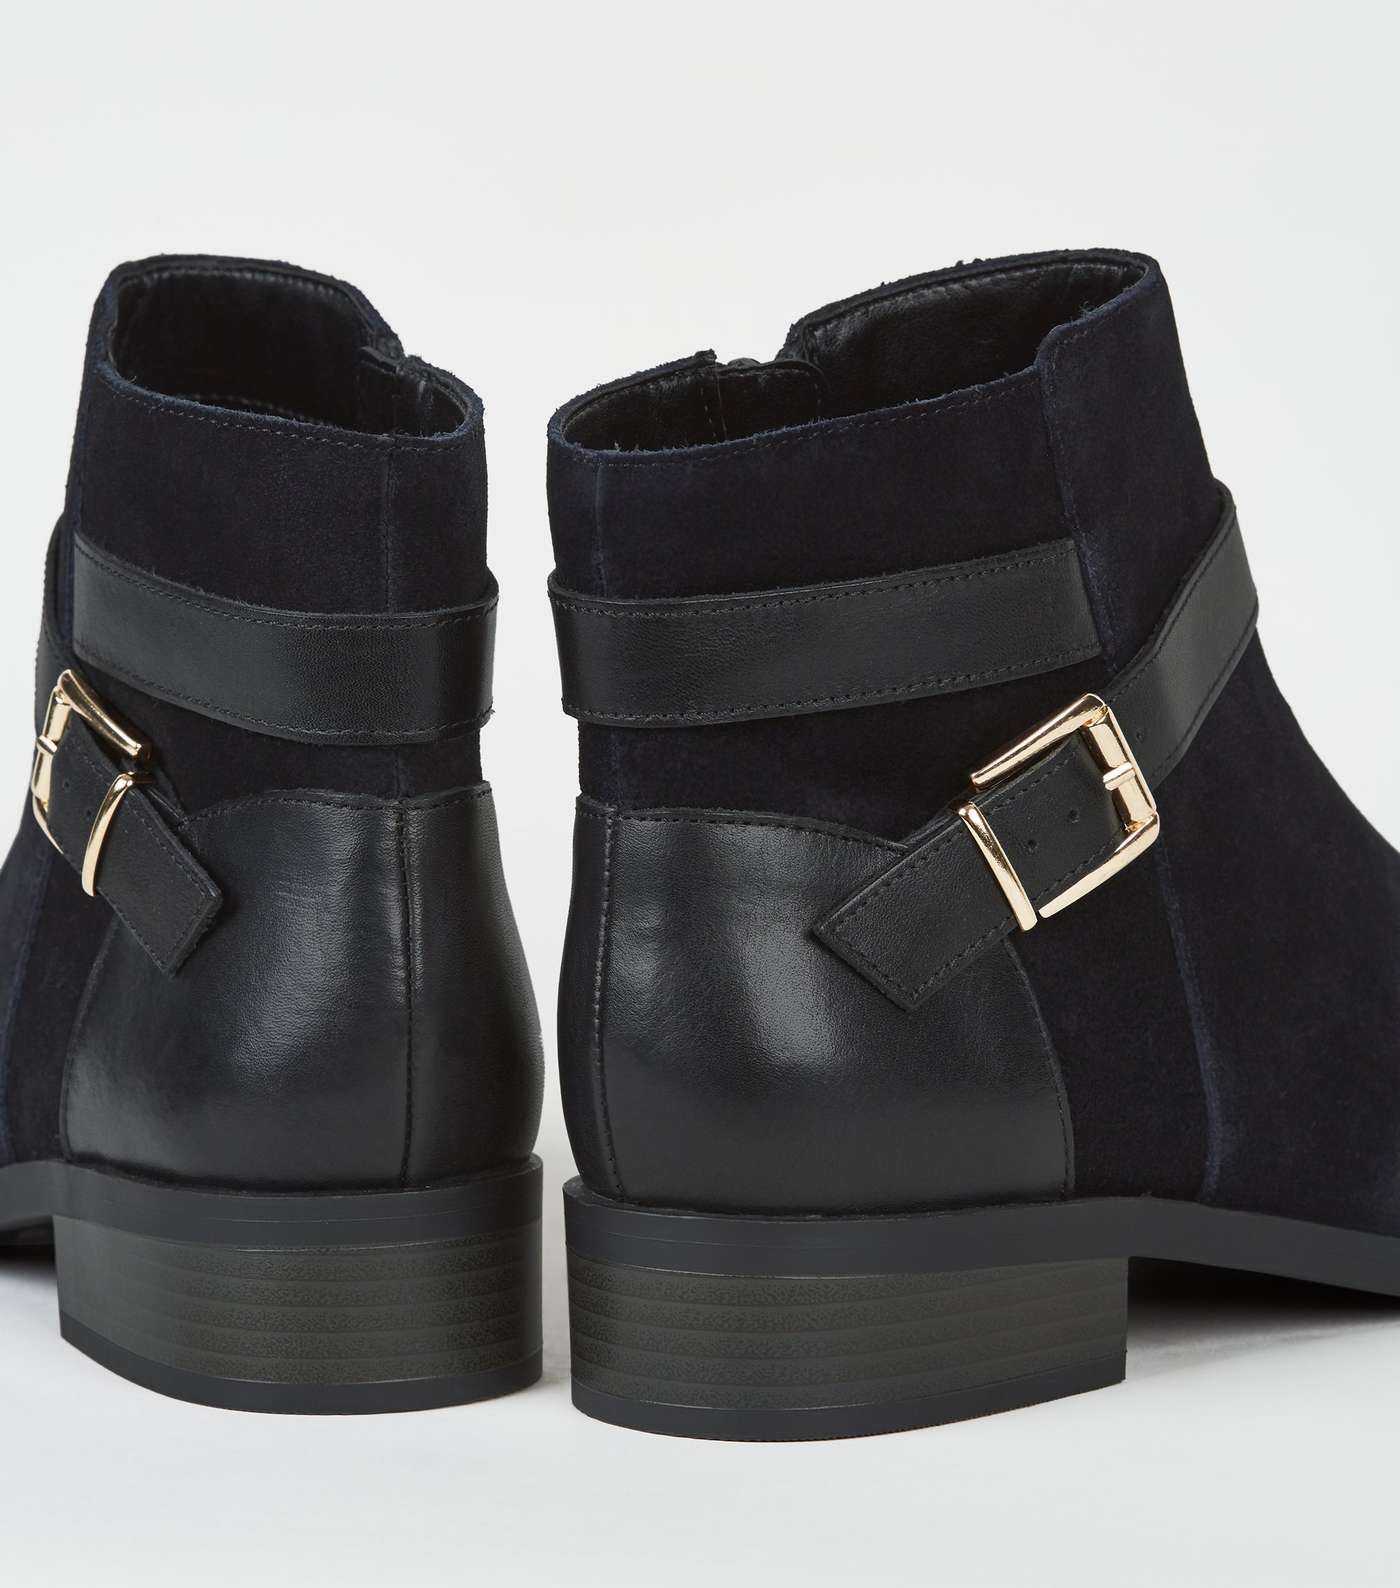 Wide Fit Black Suede Buckle Ankle Boots Image 4